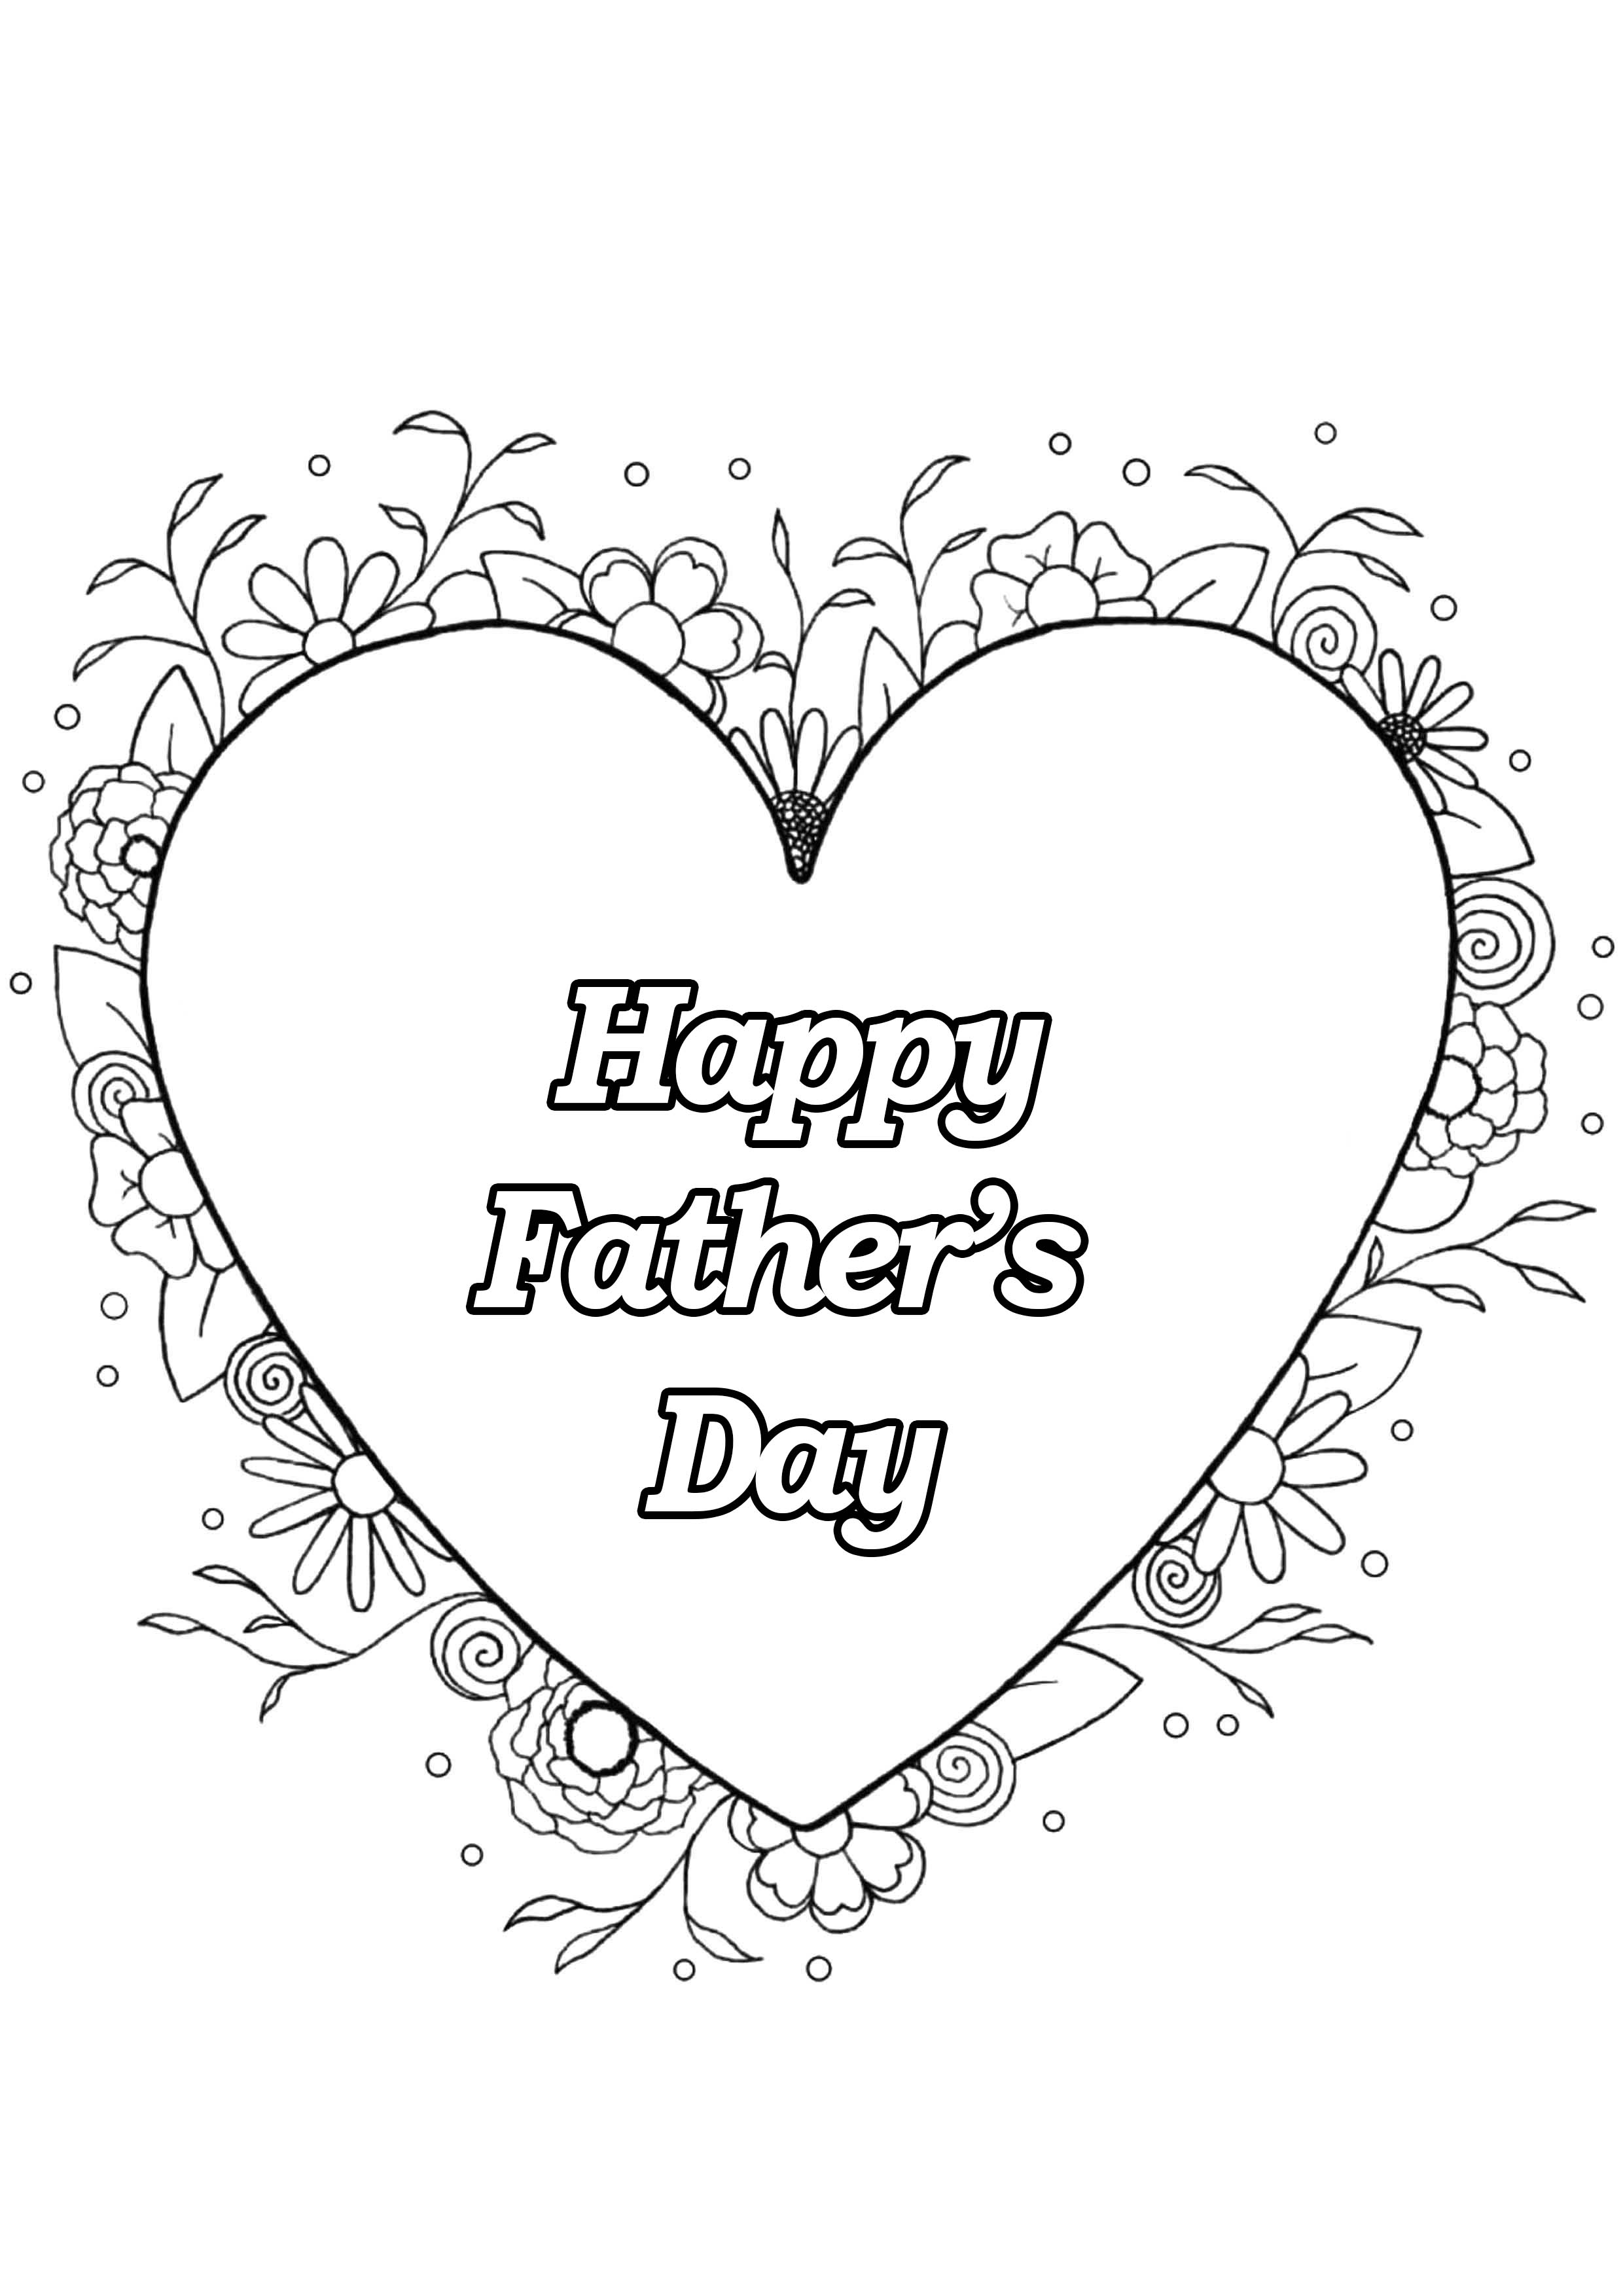 Father's day coloring page : Heart & Flowers, Artist : Louise